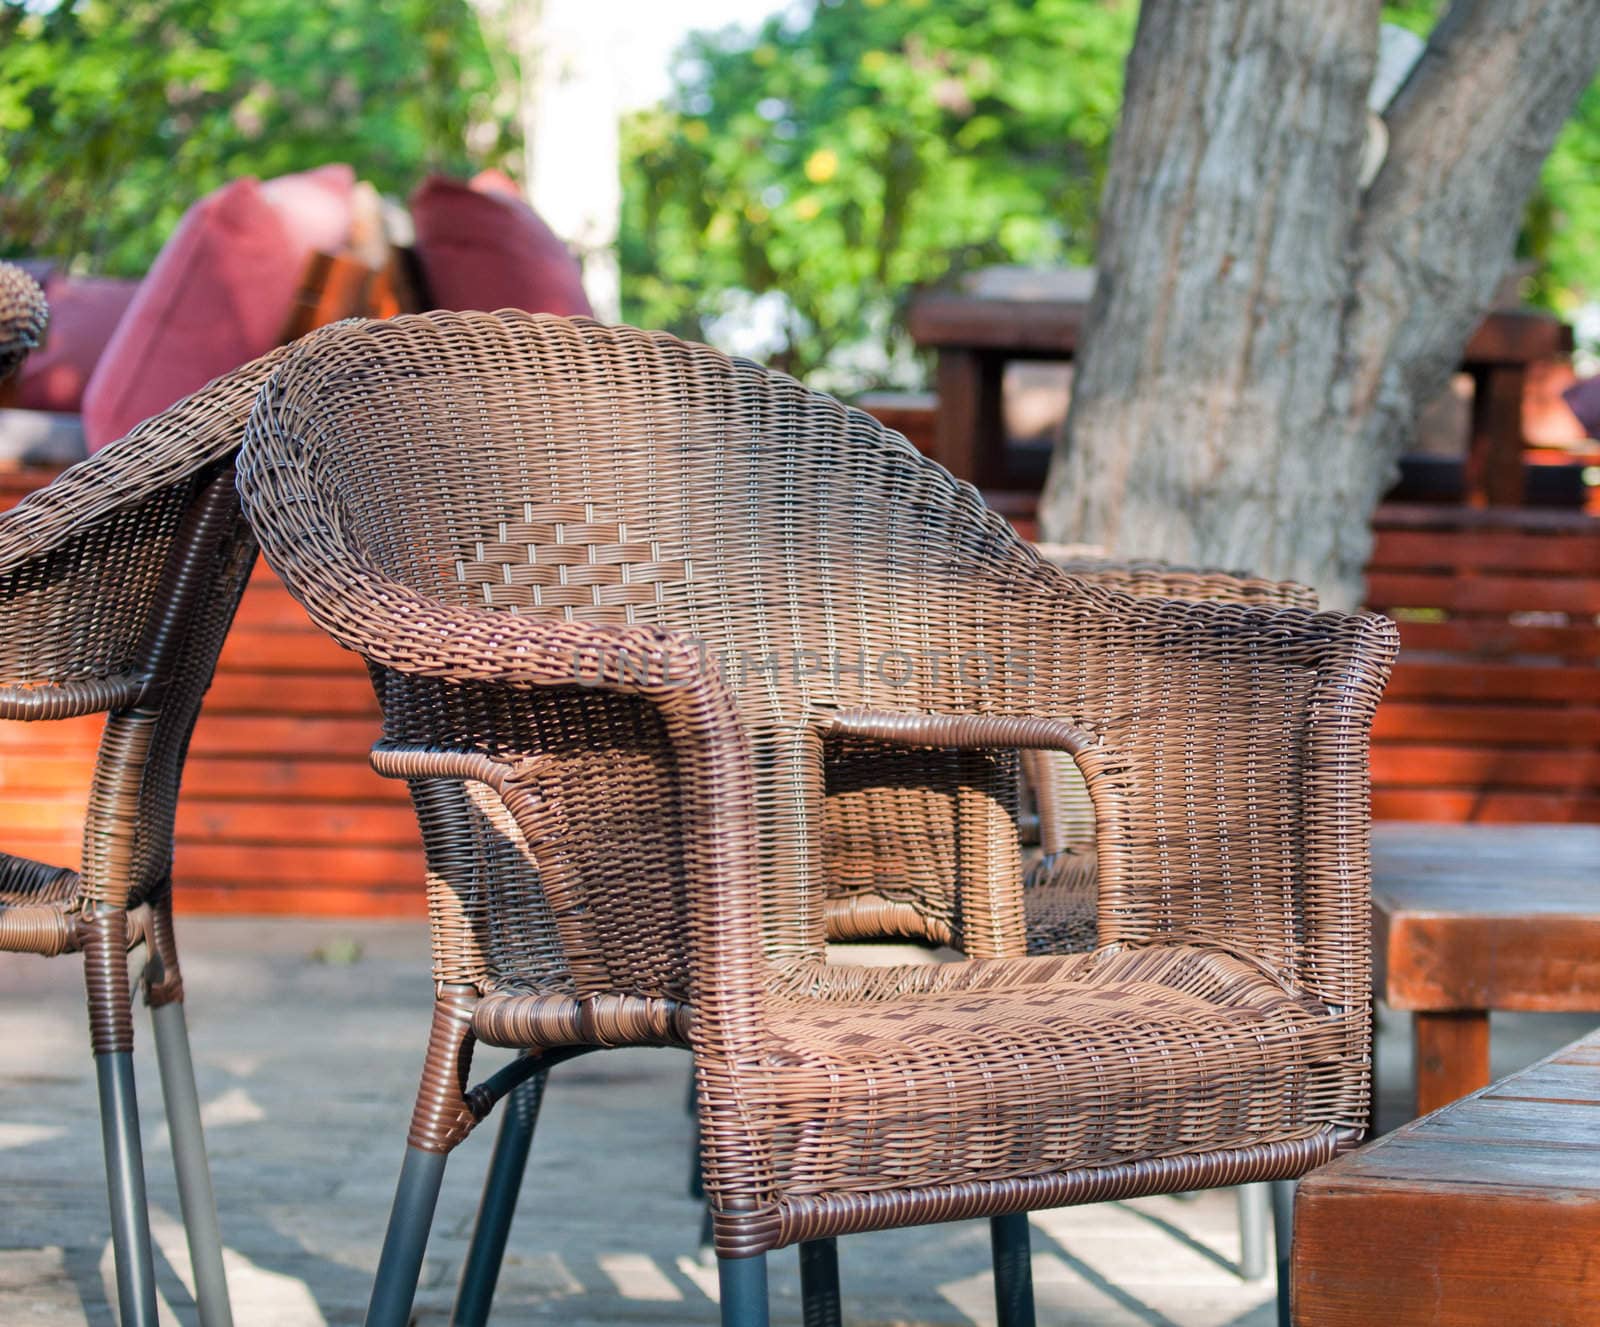 Wicker chairs are on the veranda of the summer cafe.